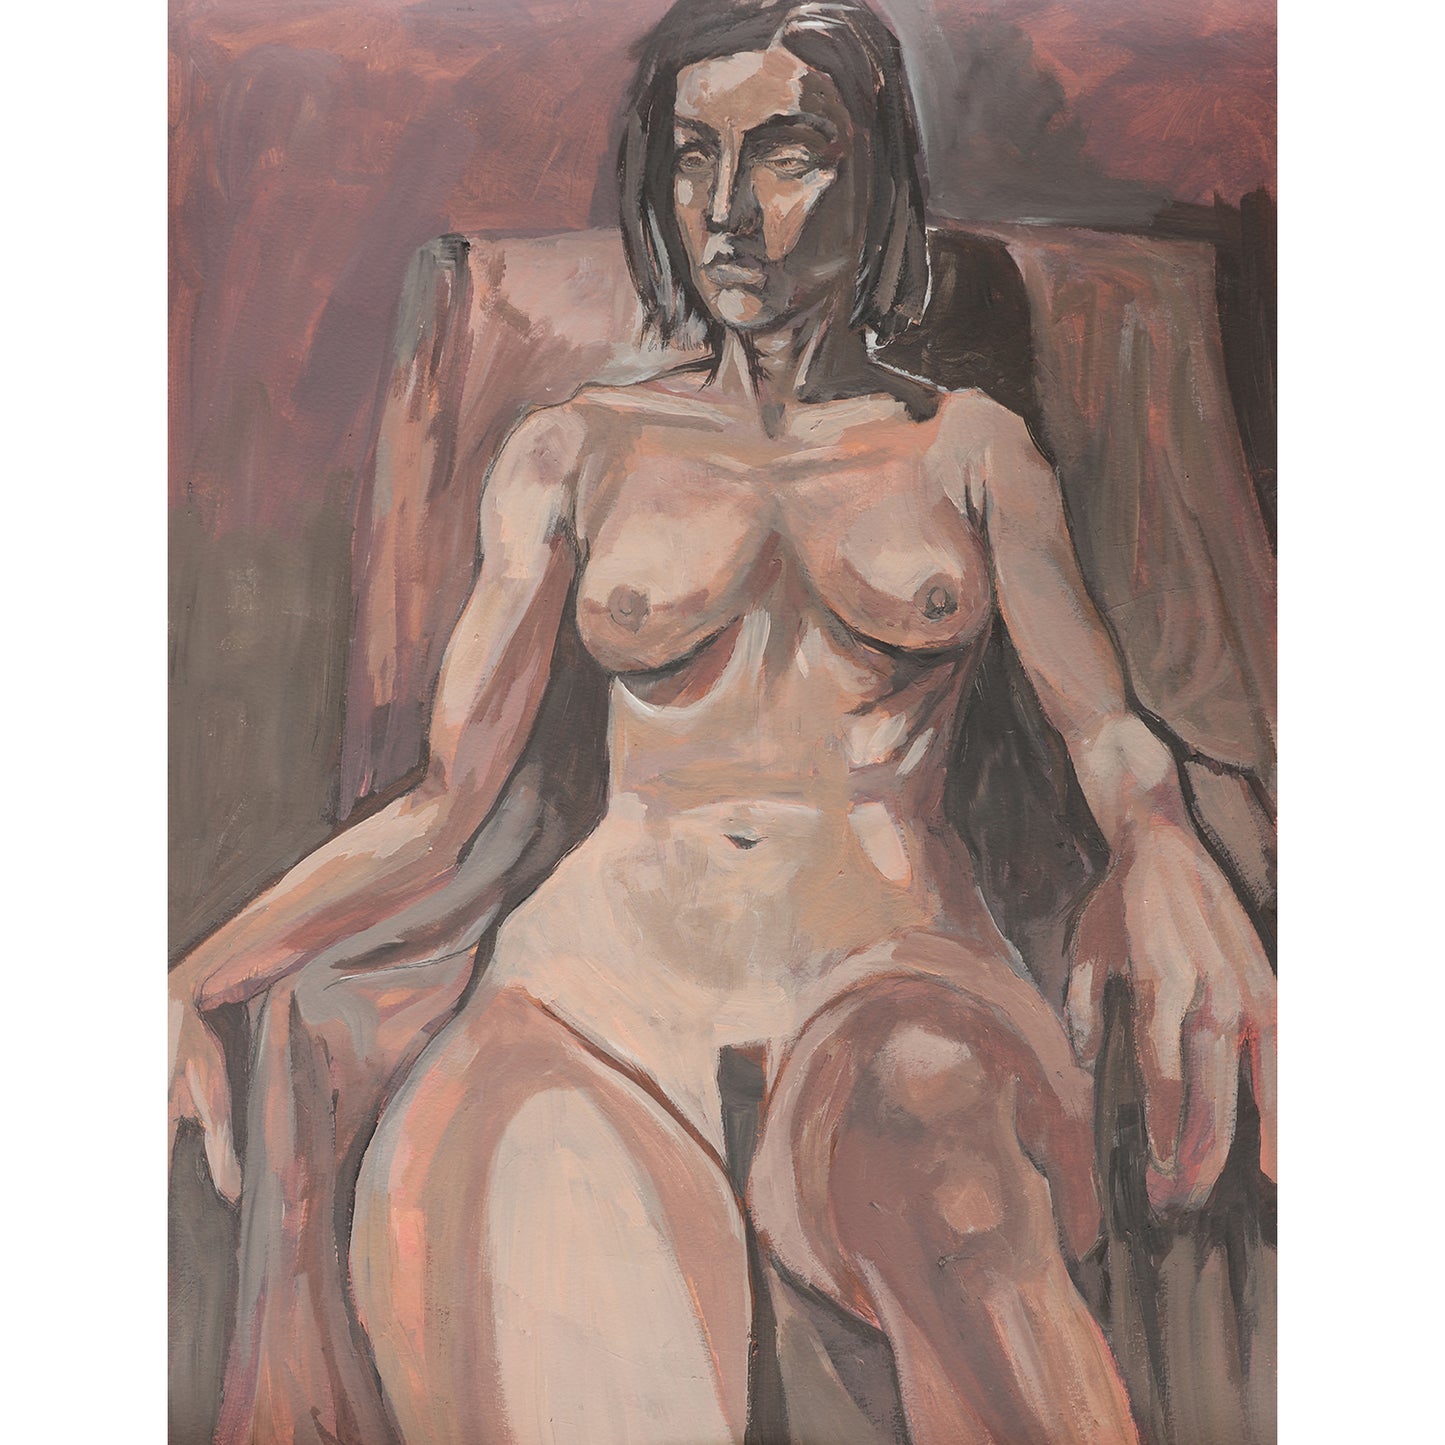 - Woman in chair - 18x24